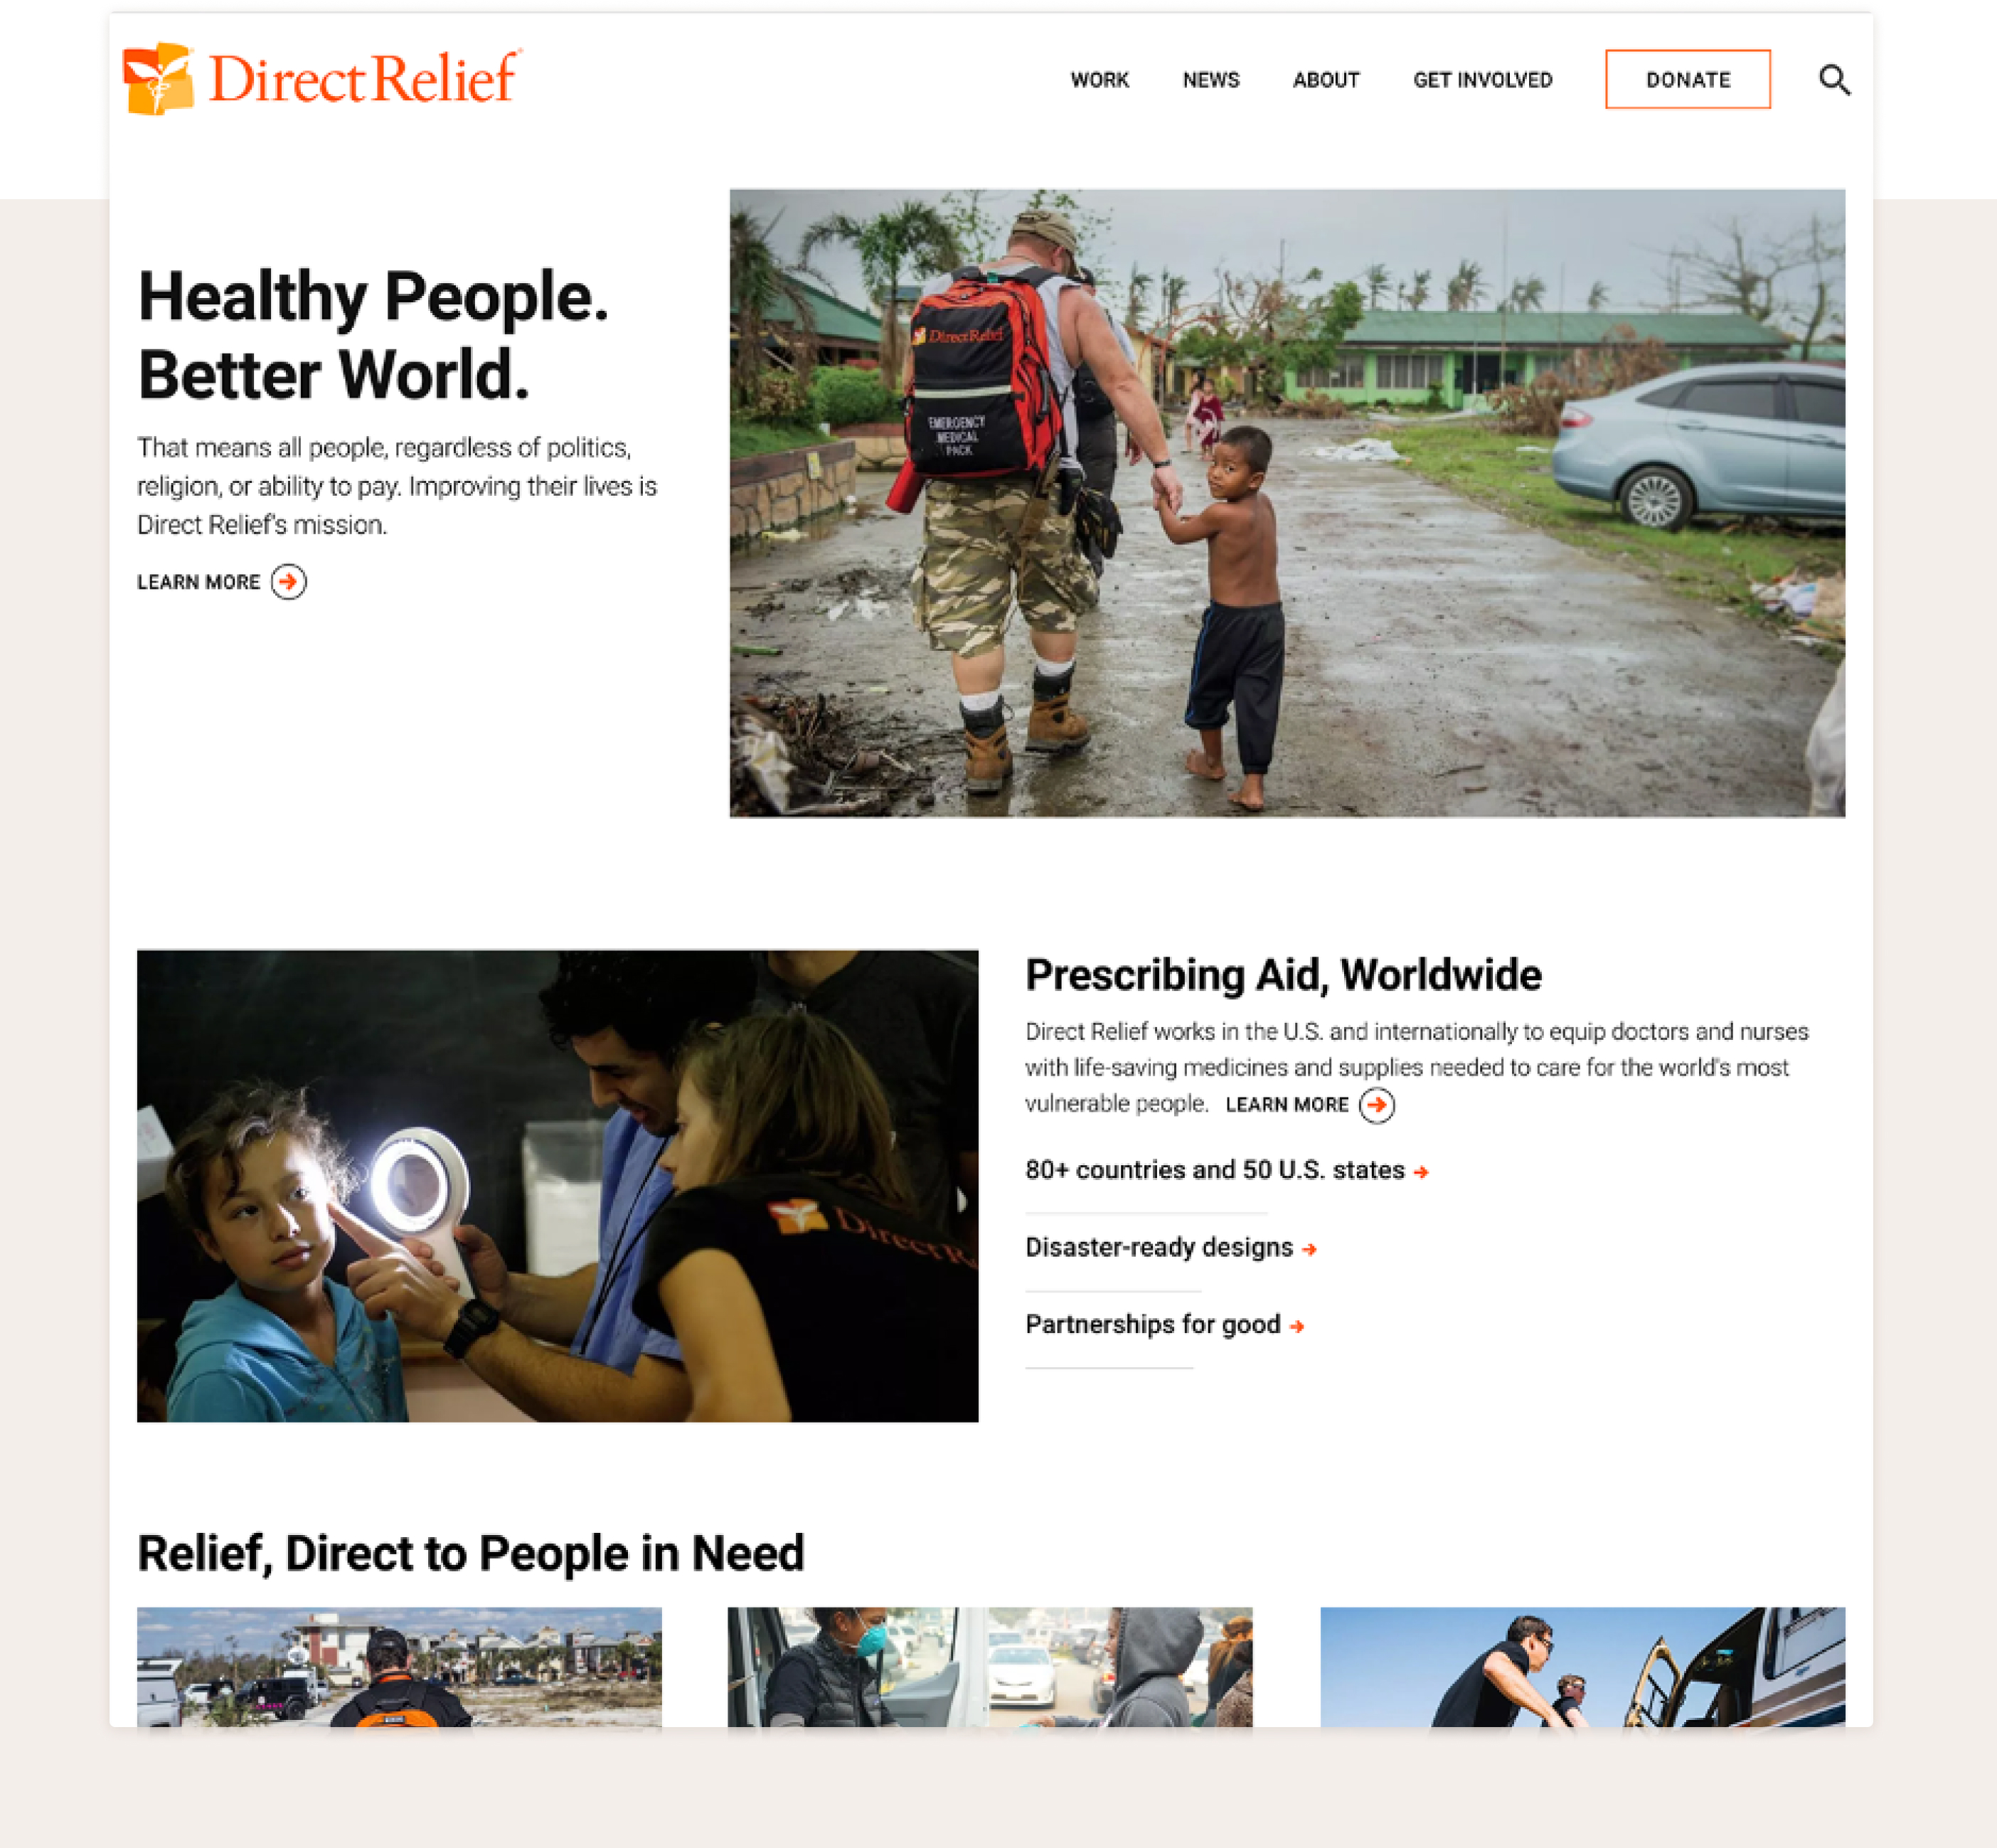 The main page of Direct Relief with navigation, featured article, and additional content